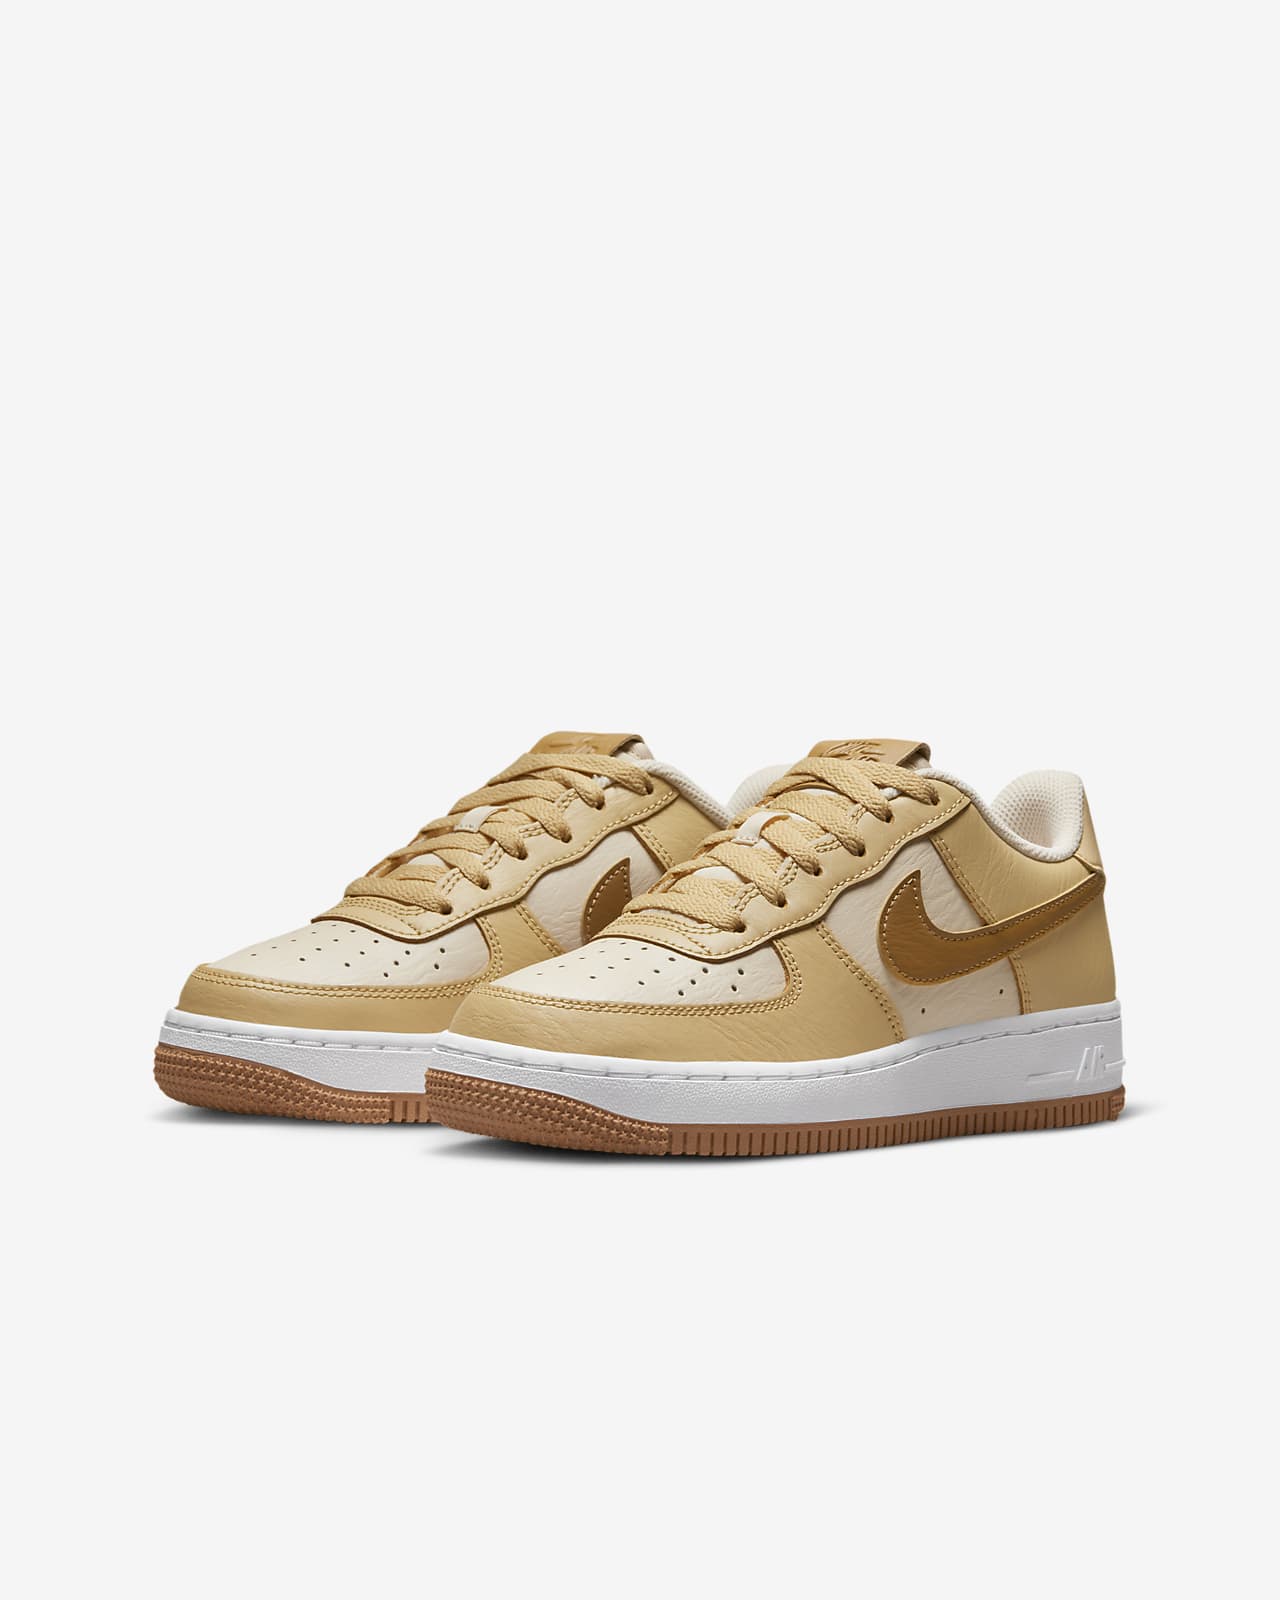 Nike Air Force 1 LV8 EMB GS RIGHT FOOT DISCOLORATION Kids US7Y DN4178-001